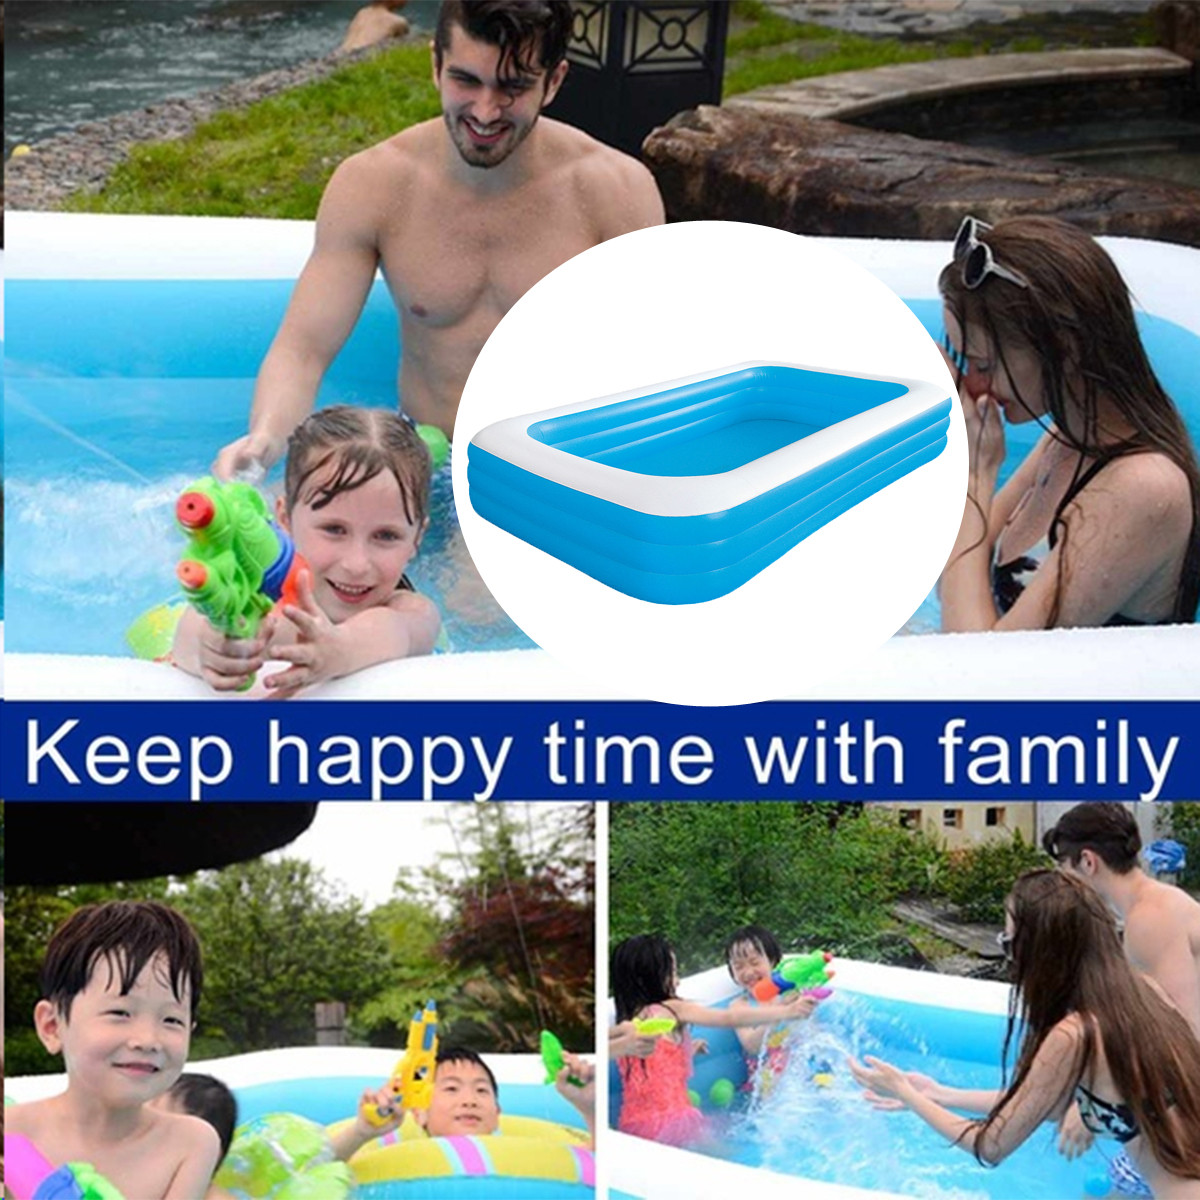 Portable-Outdoor-Inflatable-Swimming-Pool-Childrens-Pool-Family--Indoor-Large-Bathing-Tub-For-Baby-K-1715012-2